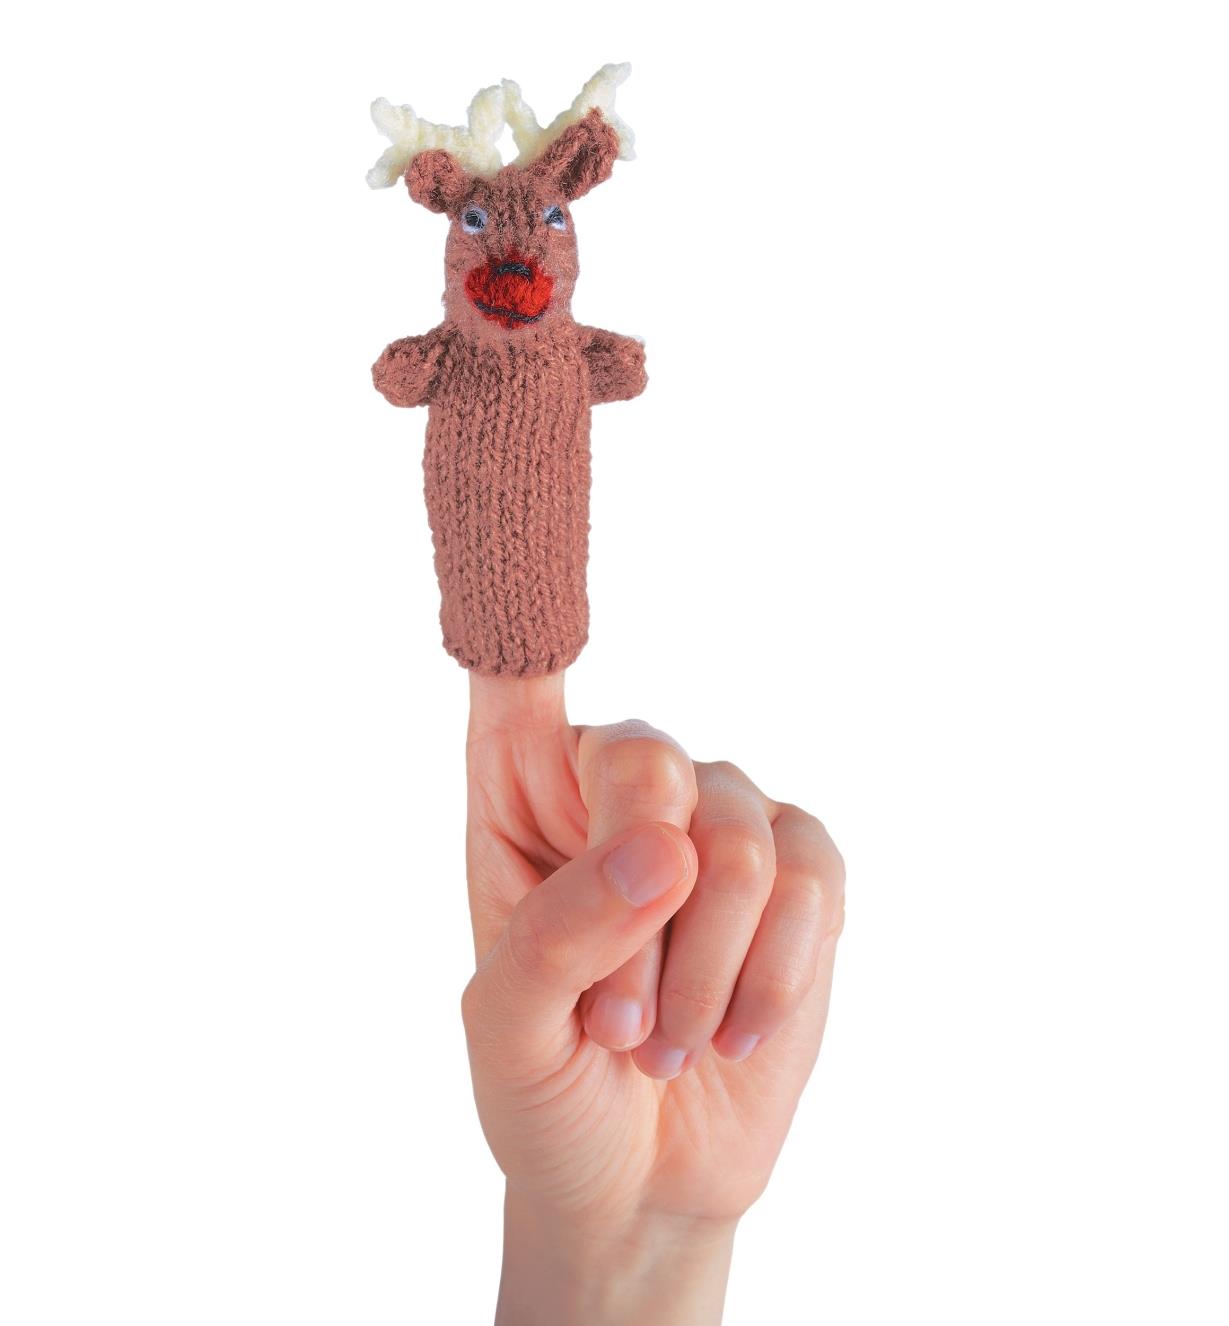 Moose puppet on a person's index finger